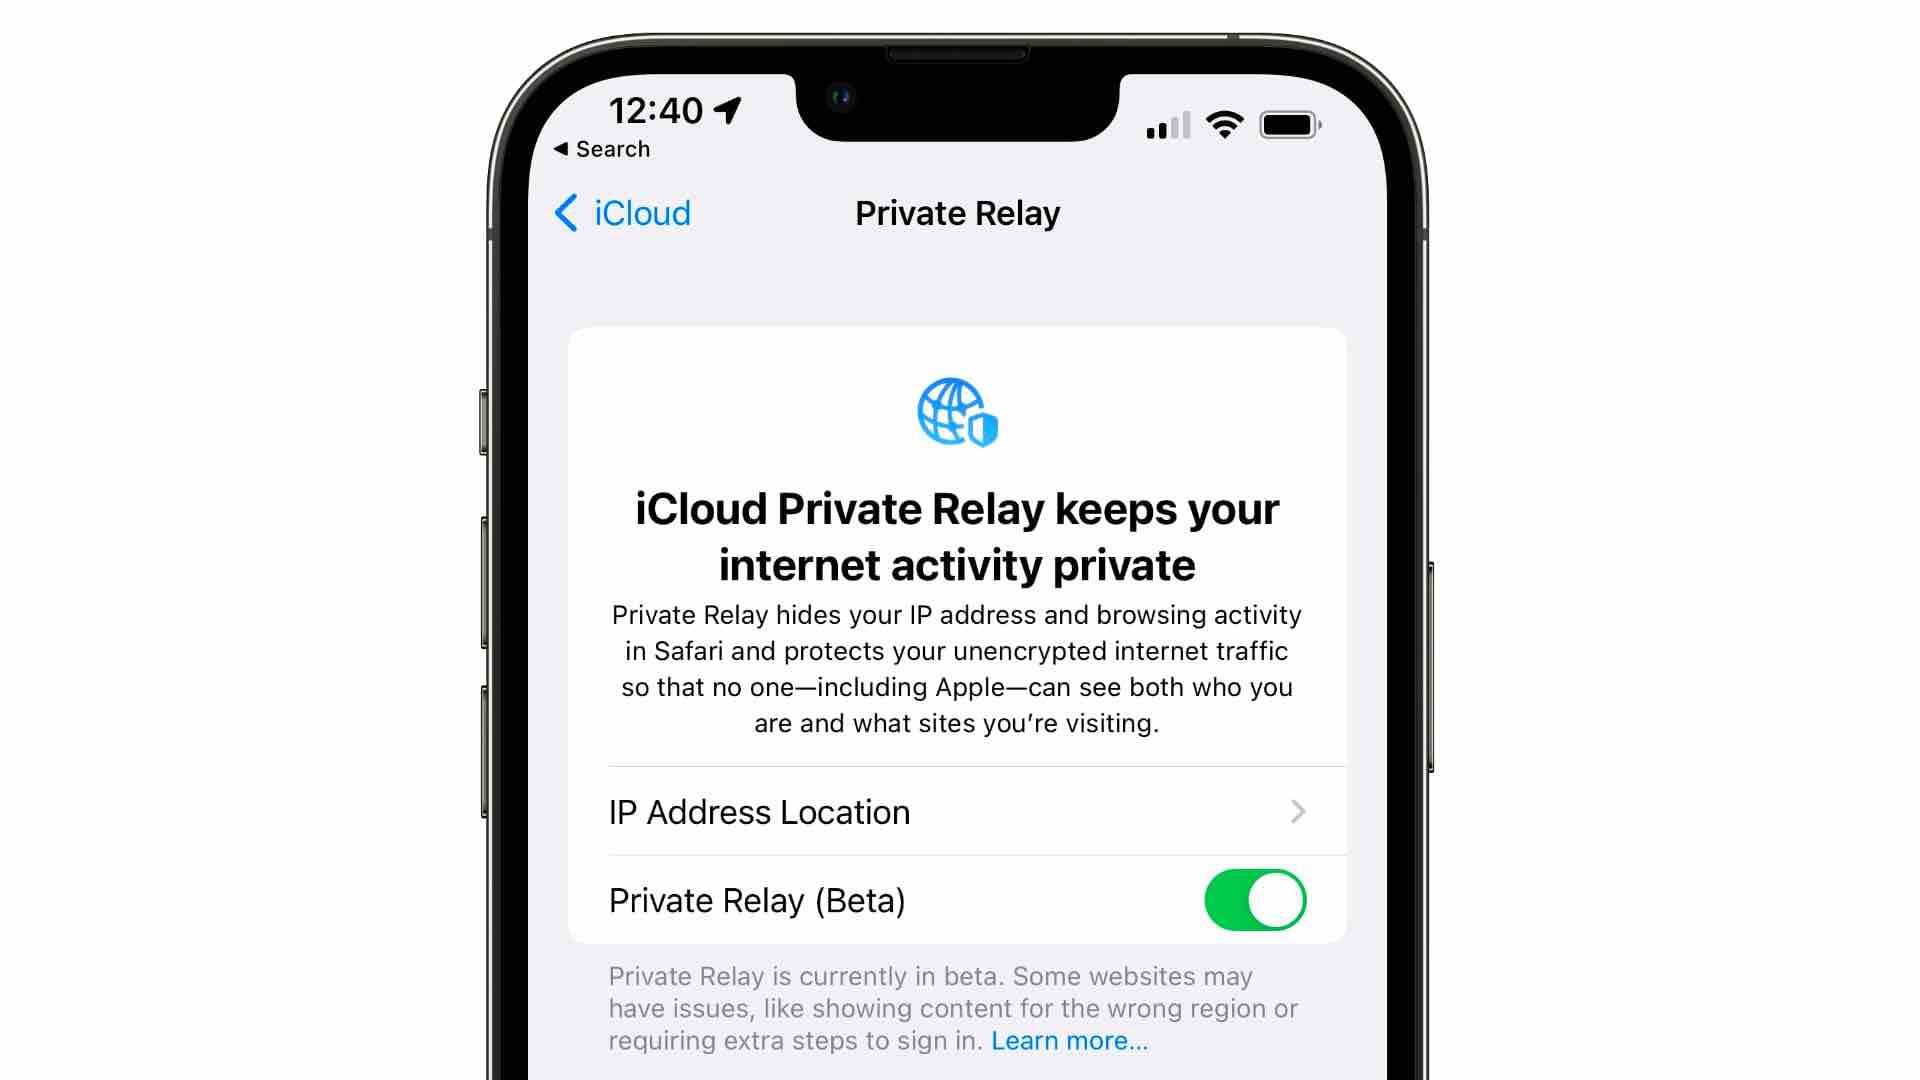 EU Mobile Operators Want Apple's iCloud Private Relay Service to Be Outlawed Ove..